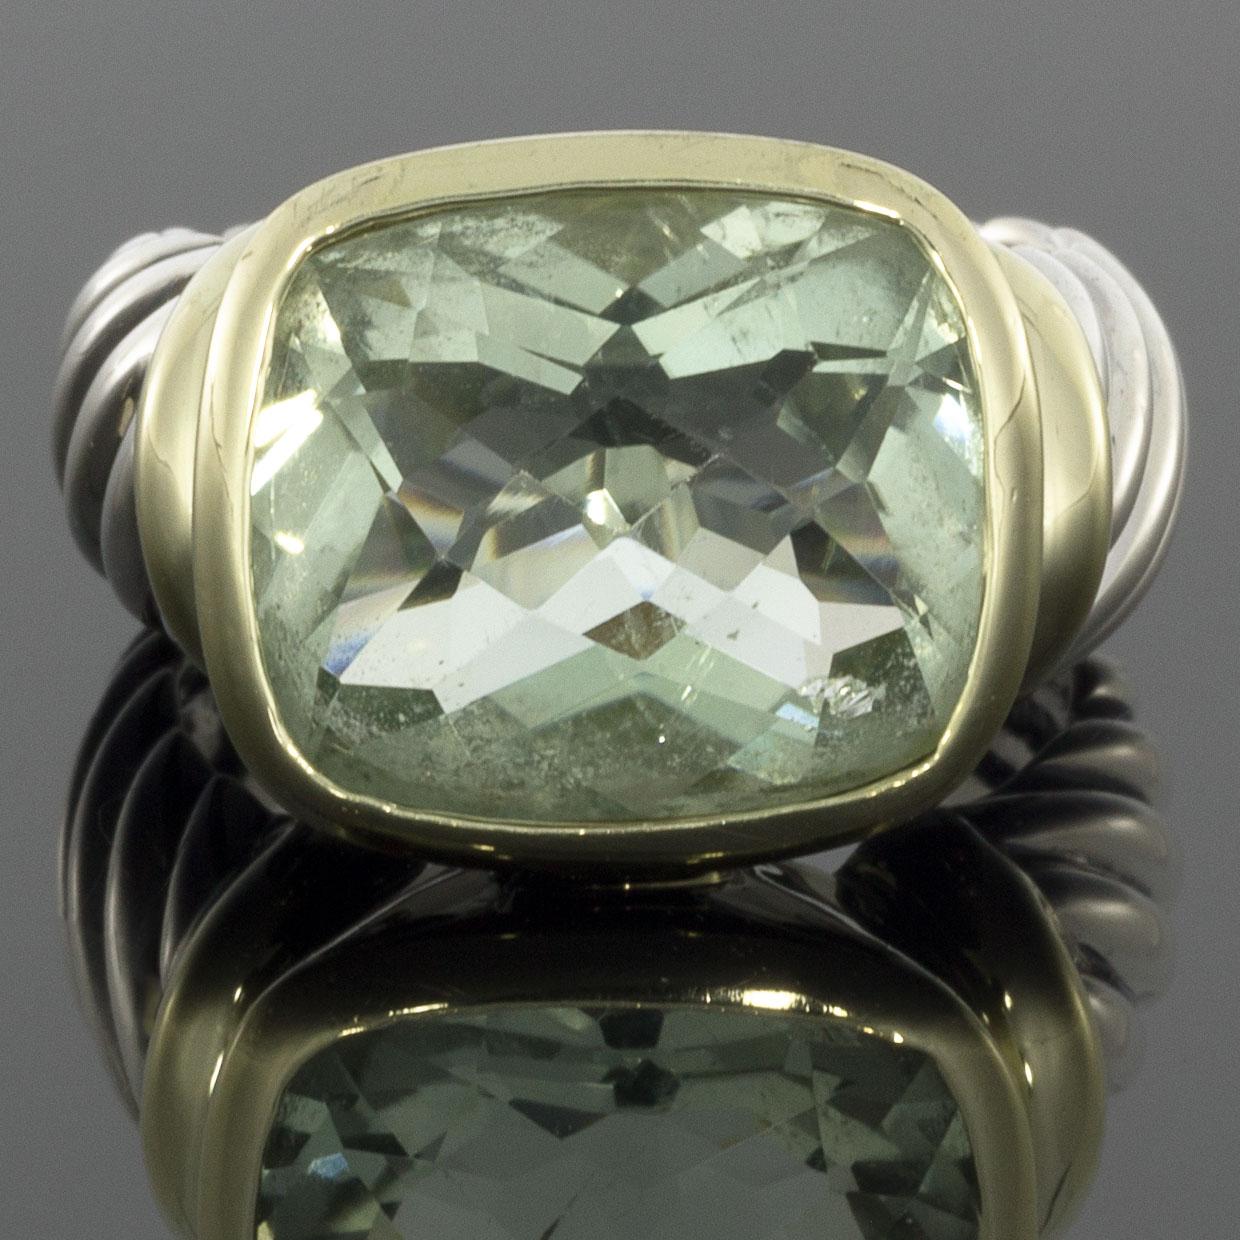 Item Details:
Estimated Retail - $1,100.00
Brand - David Yurman
Collection - Noblesse
Metal - 14 Karat Yellow Gold & 925 Sterling Silver
Style - Solitaire Ring
Ring Size - 7.00
Sizable - Yes
Width - 10.00 mm
Colored Stone Color - Green

Stone 1